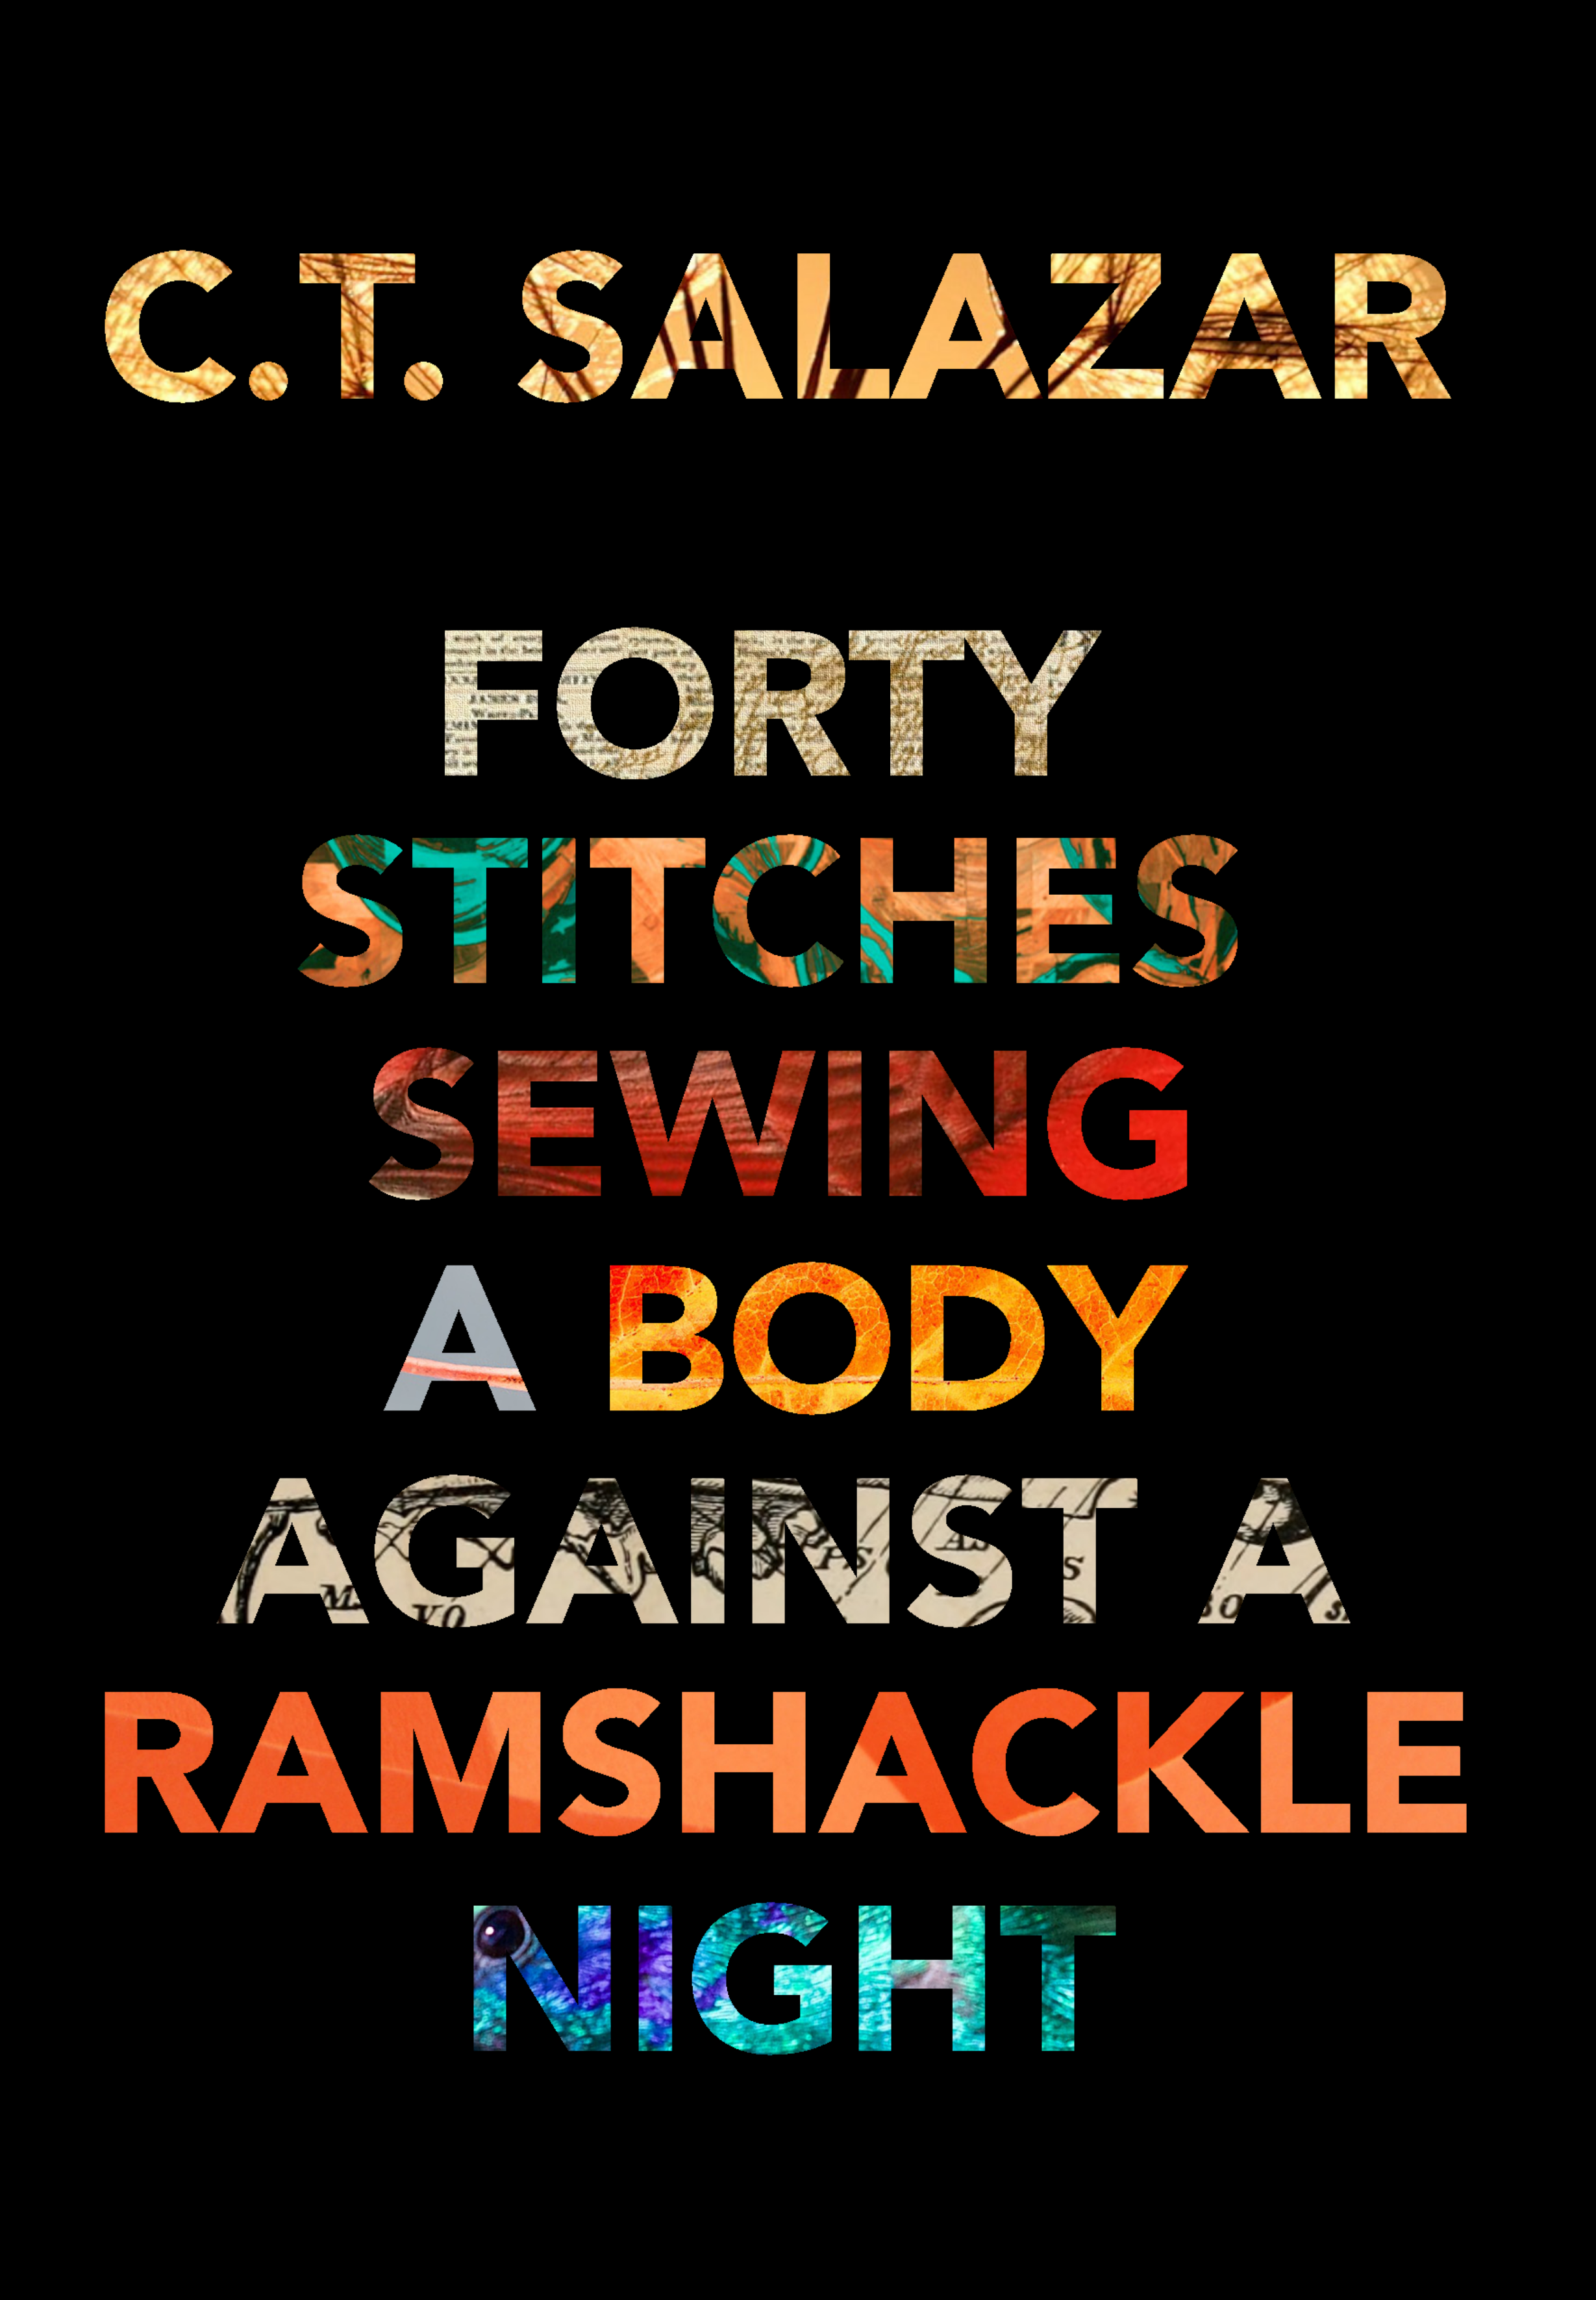 Cover of CT Salazar's book, Forty Stitches Sewing a Body Against a Ramshakle Night